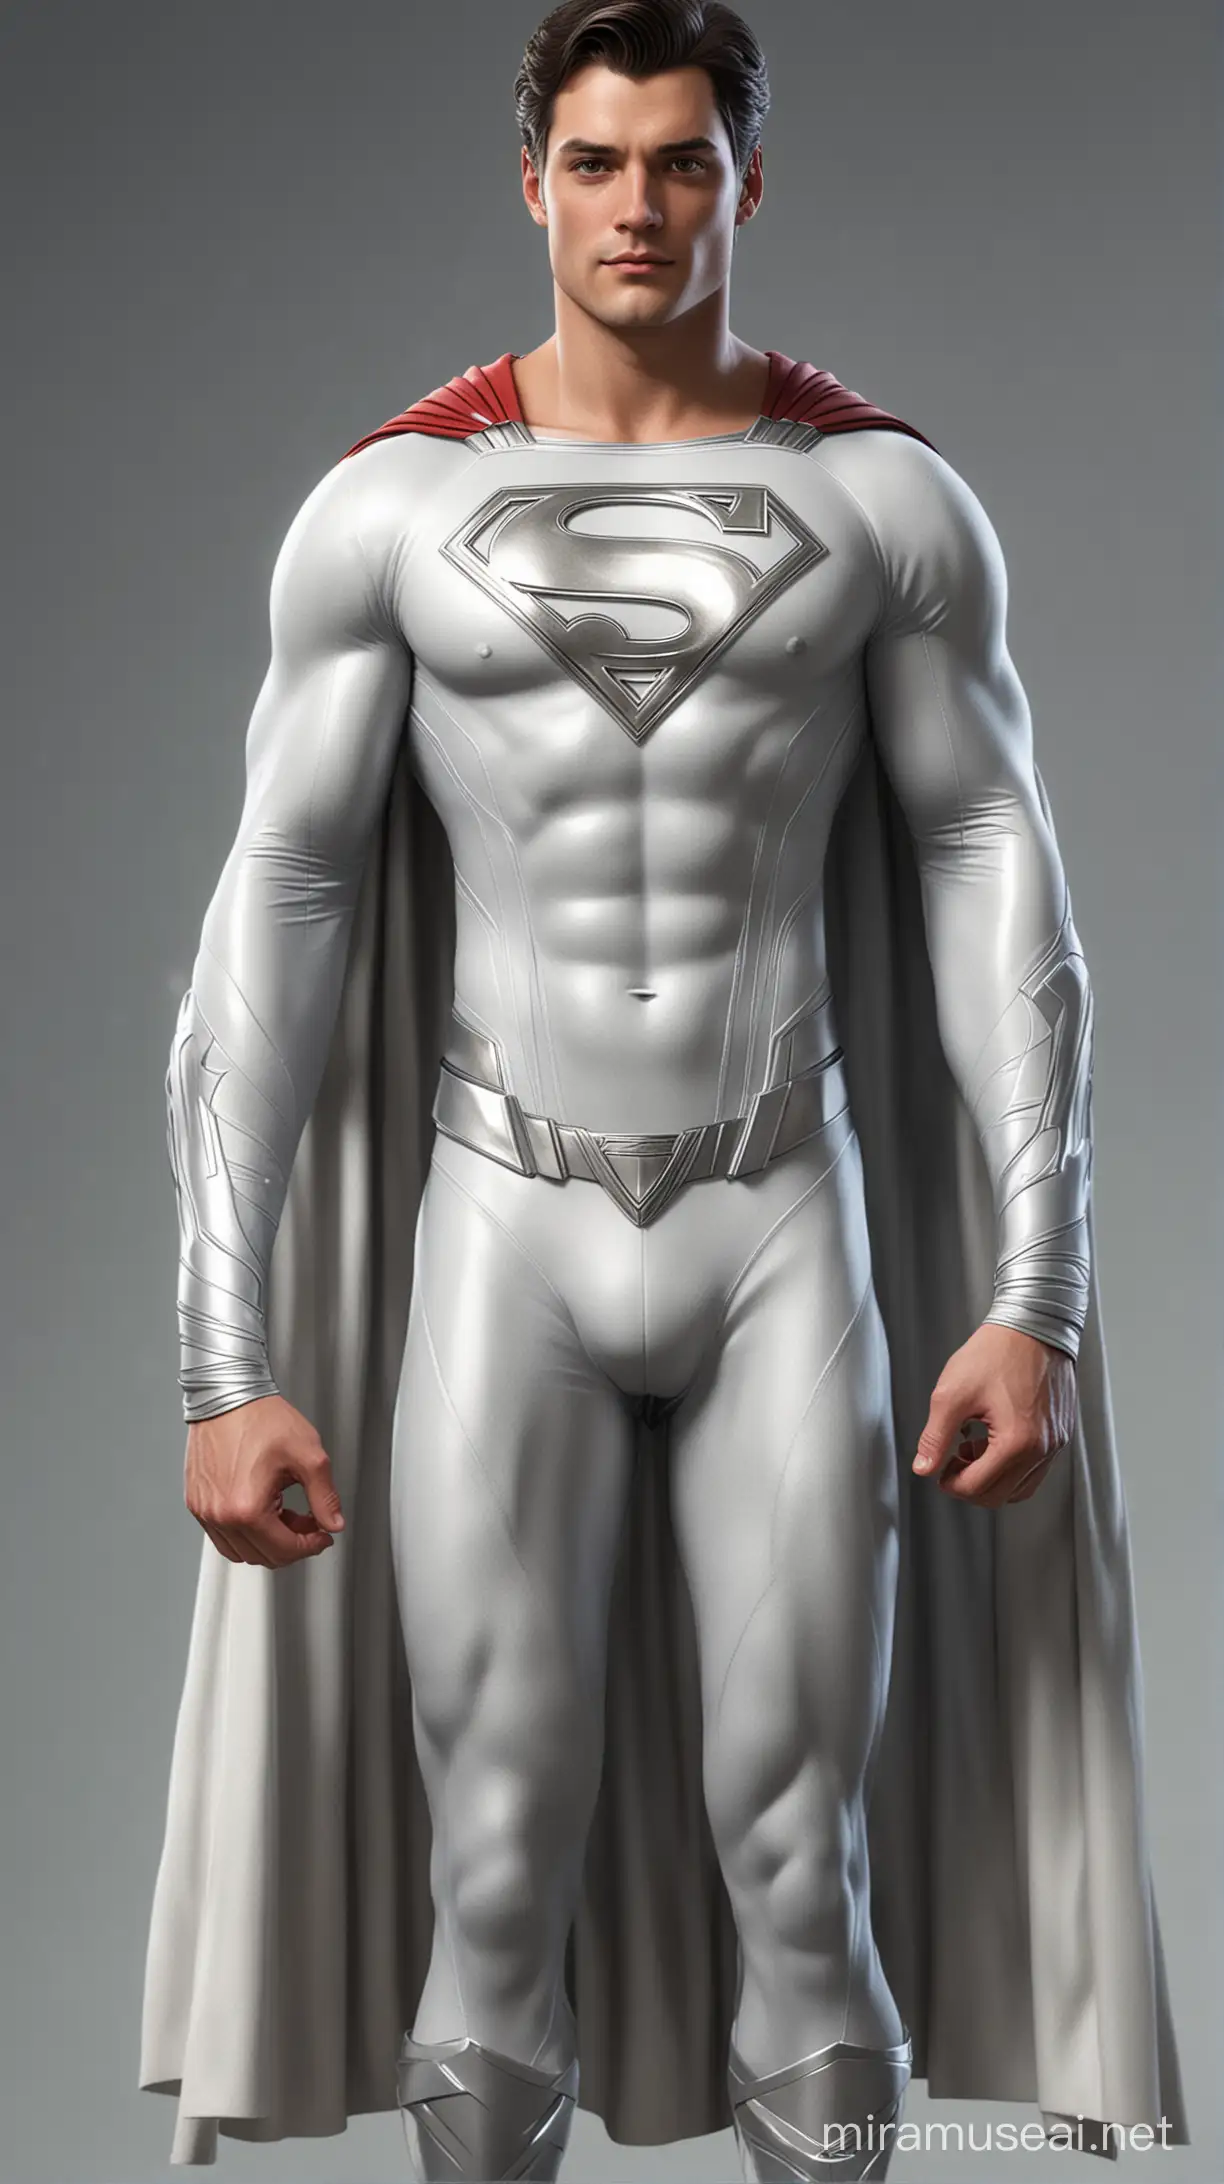 Handsome Young Celestial Superman in Elegant White and Silver Attire